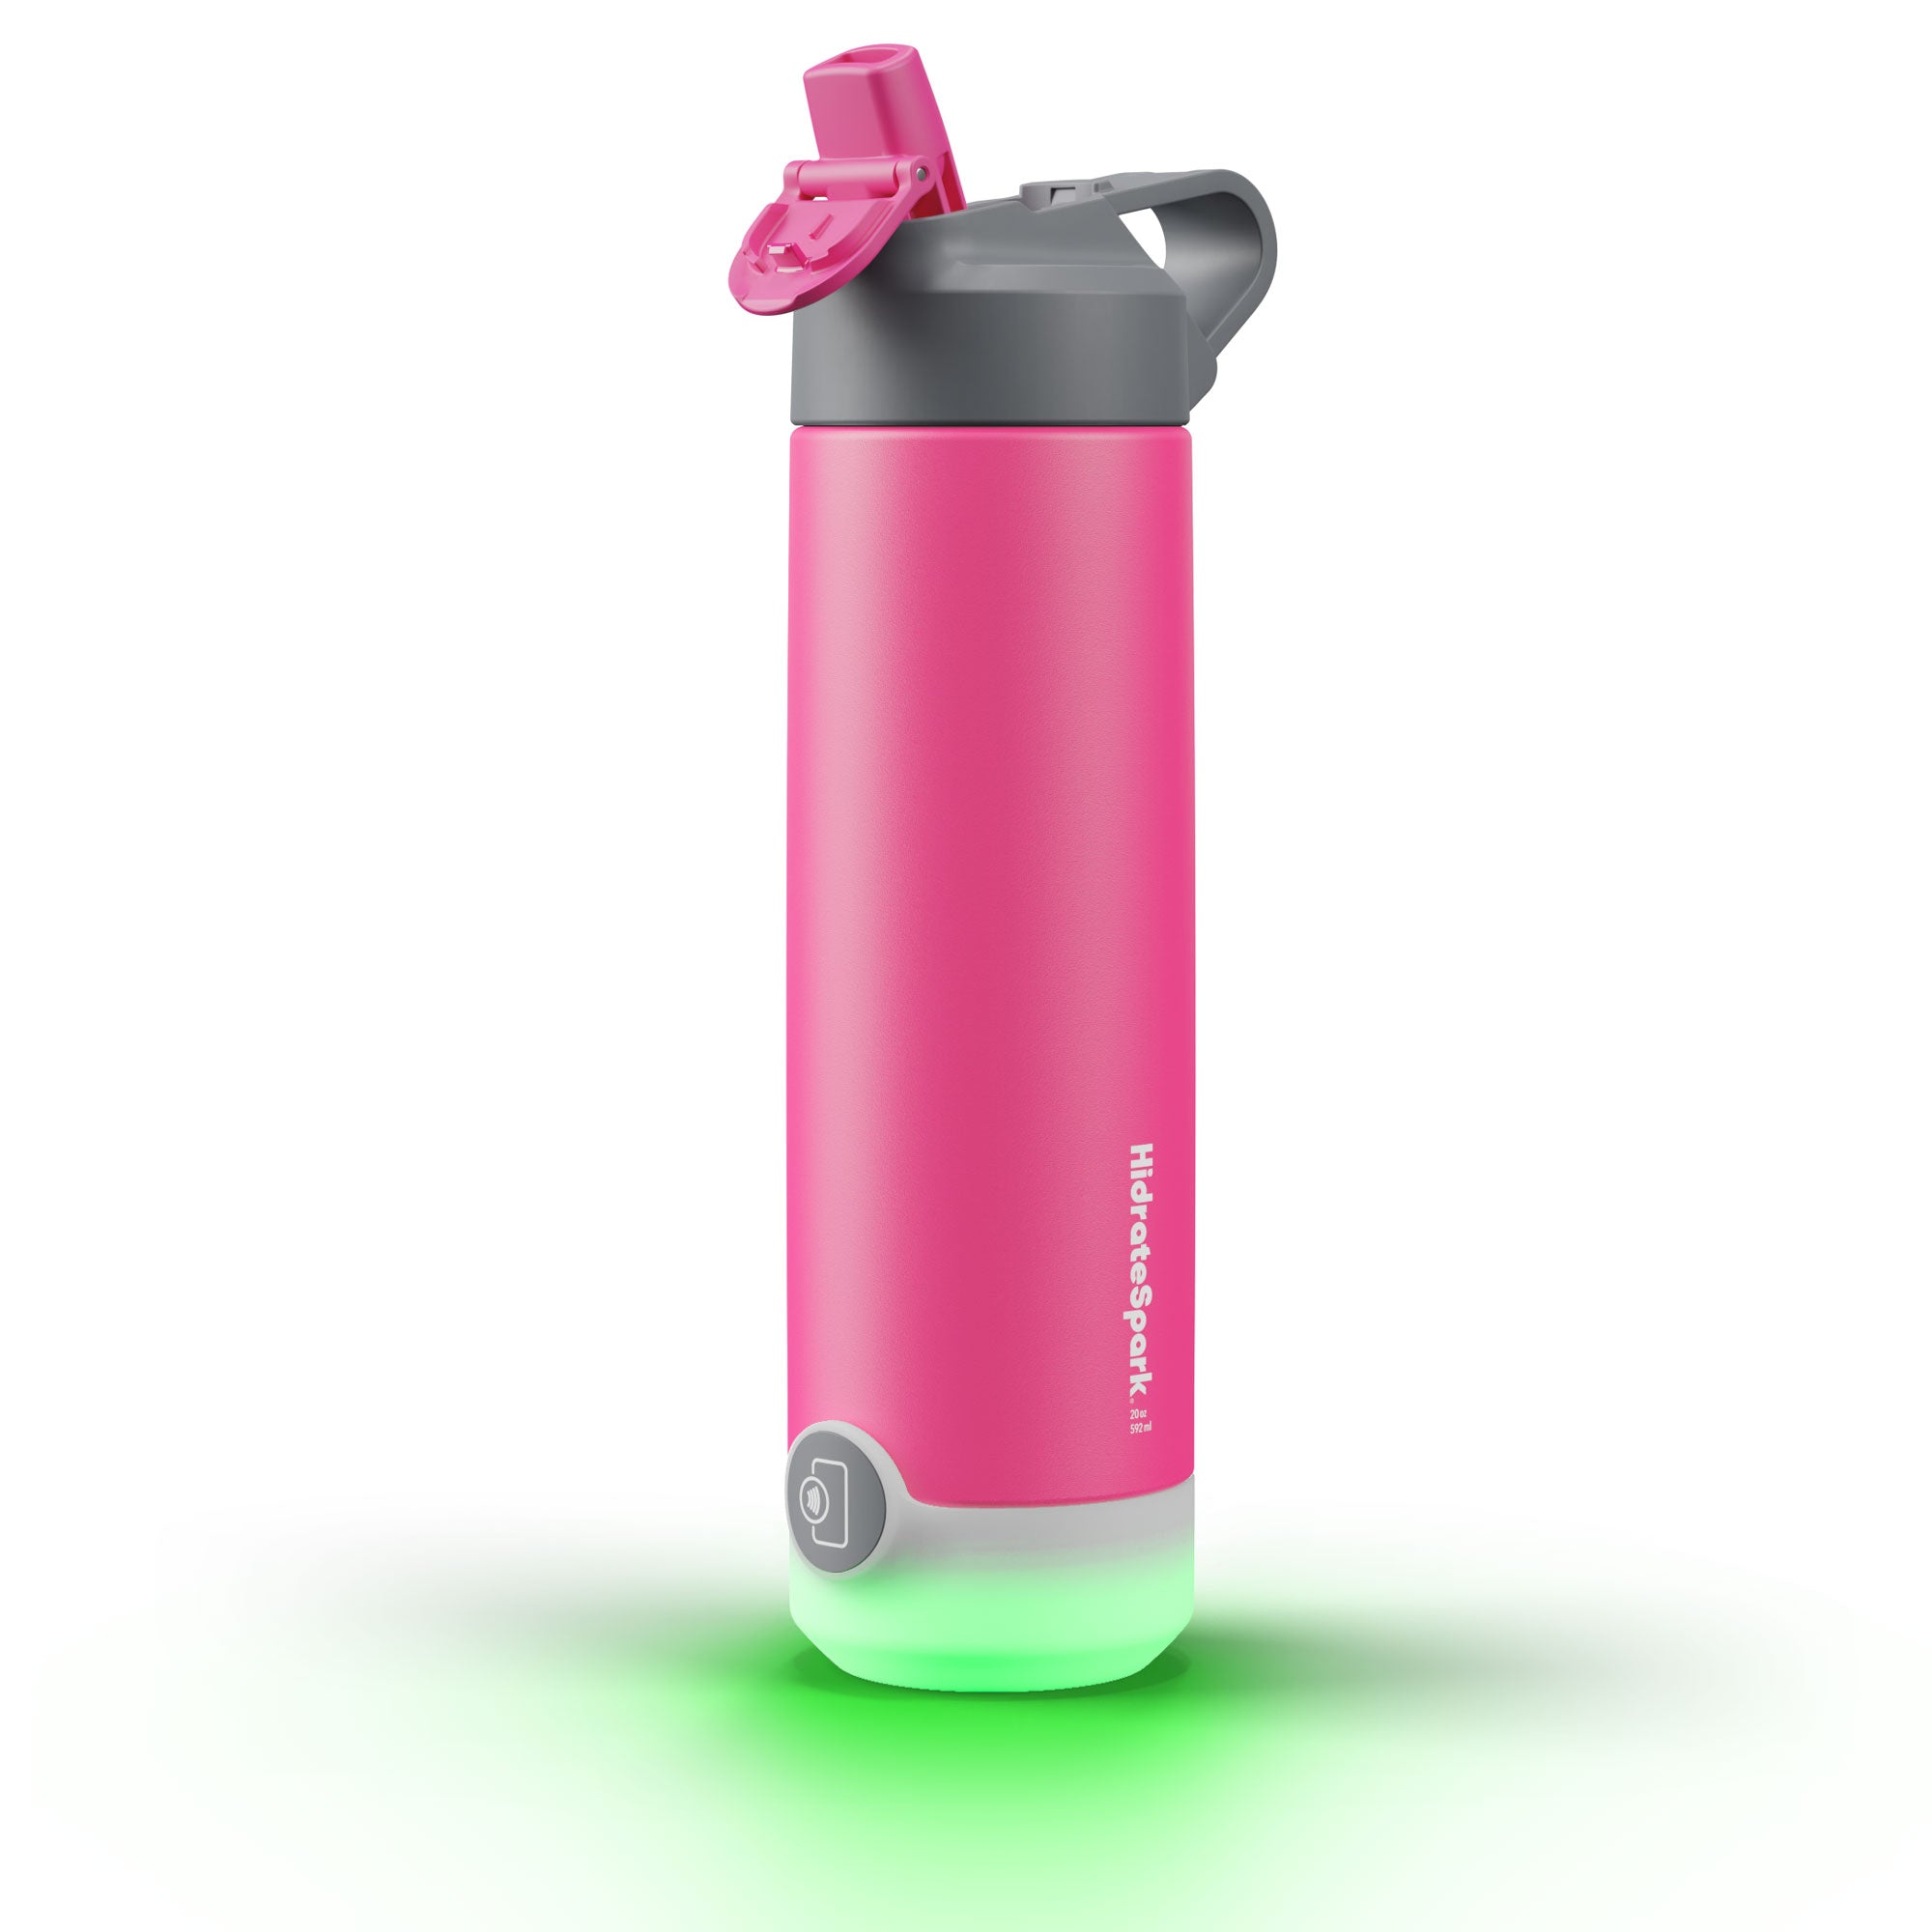 HidrateSpark TAP | 20 oz / 592 ml Insulated Stainless Steel Smart Water Bottle Straw Lid With Free Hydration Tracker & Drink Reminder App